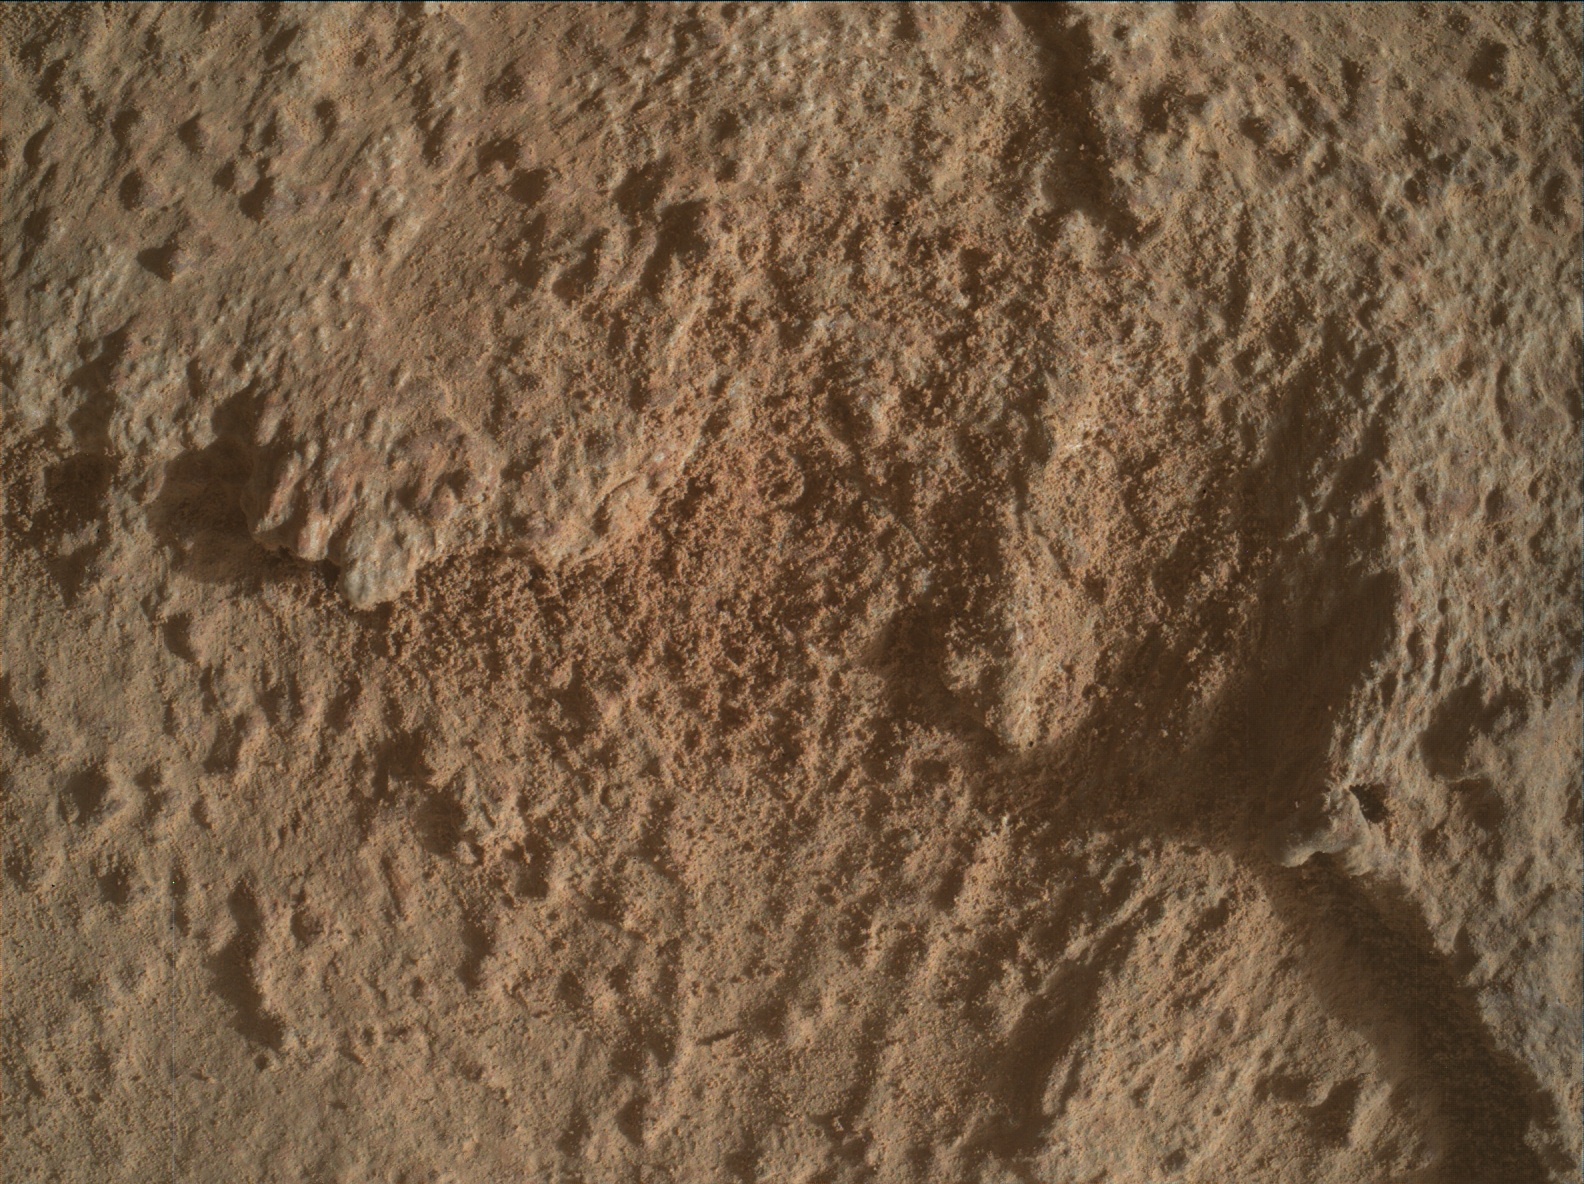 Nasa's Mars rover Curiosity acquired this image using its Mars Hand Lens Imager (MAHLI) on Sol 3206